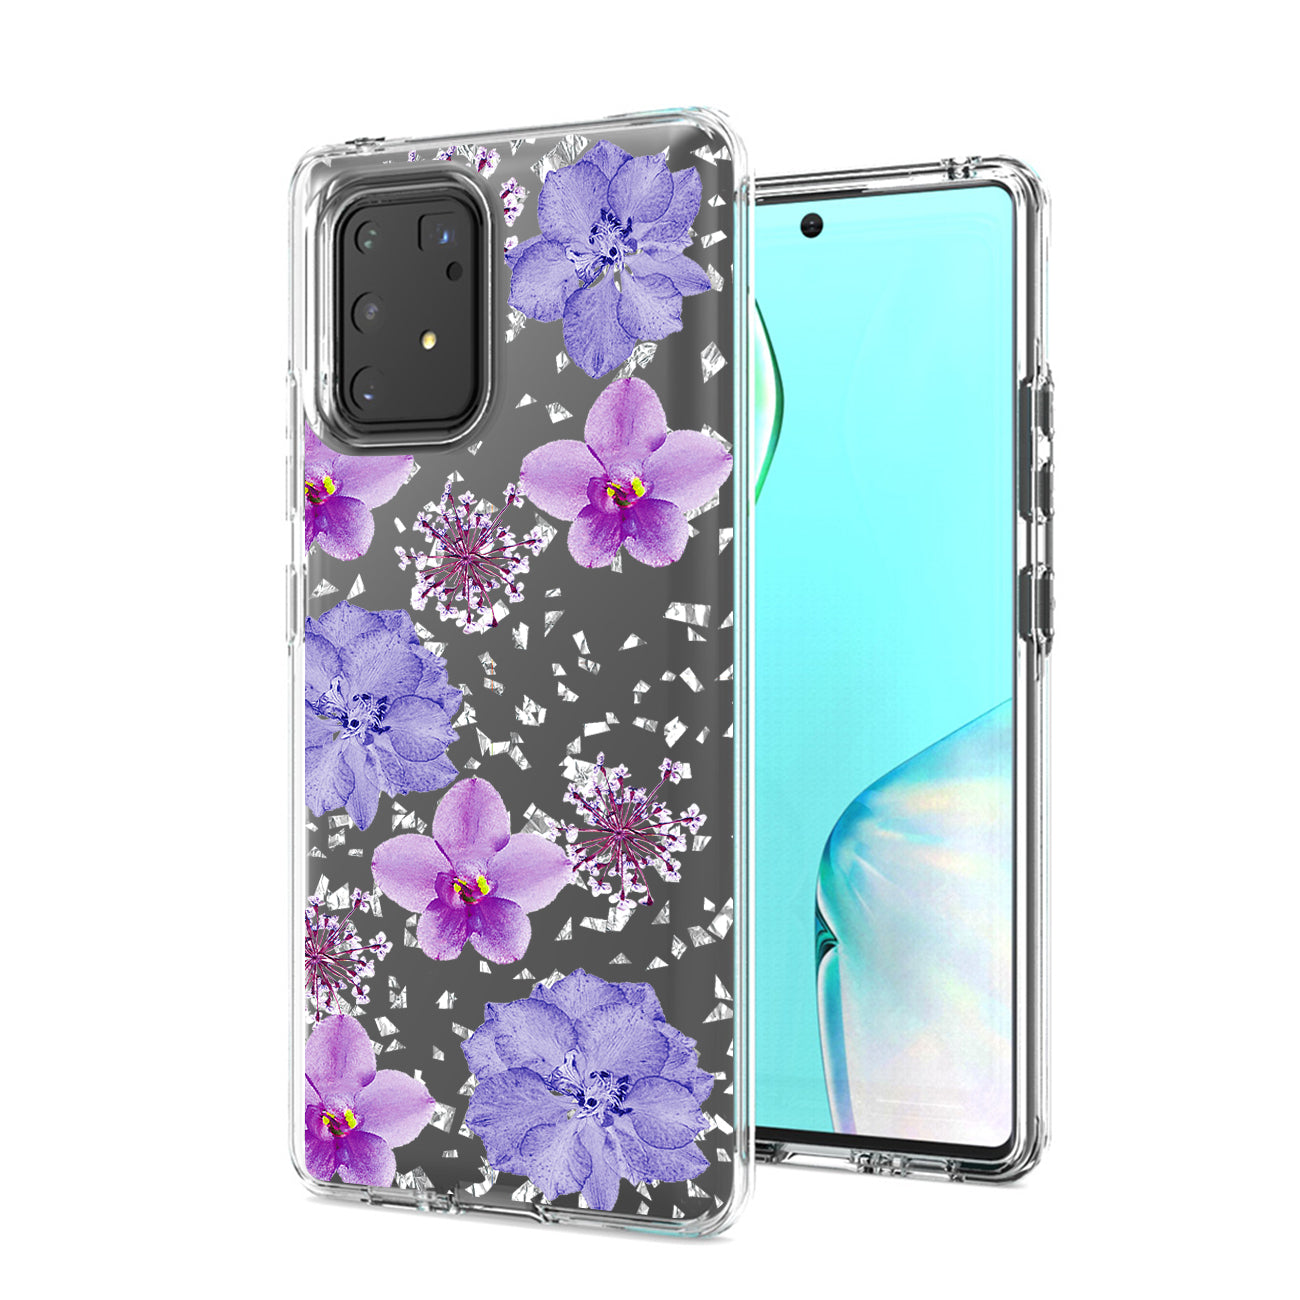 Pressed dried flower Design Phone case for SAMSUNG GALAXY A91/S10 Lite/M80S In Purple